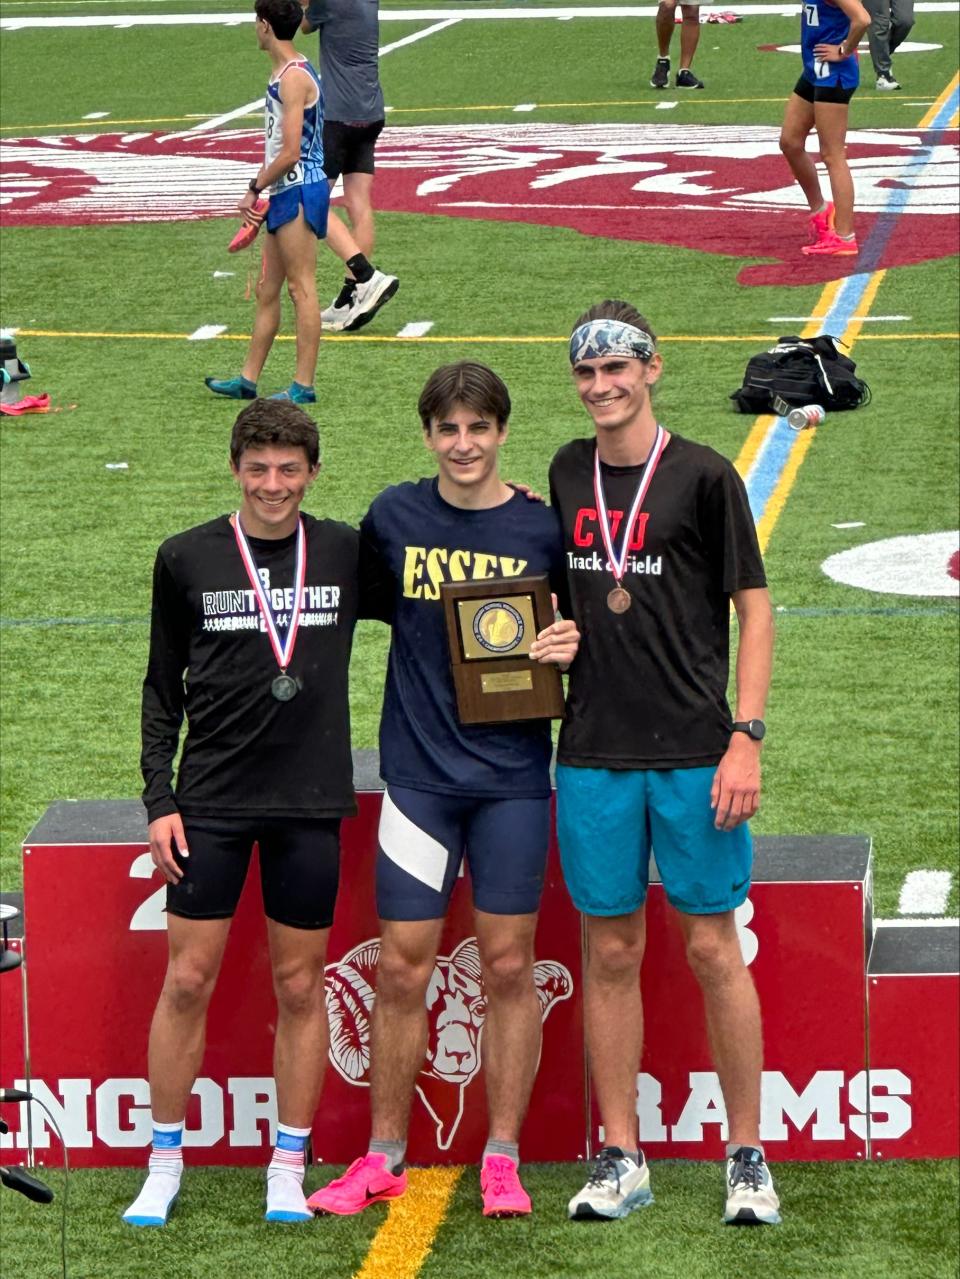 Essex's Kelton Poirier won the boys 800-meter run on Saturday at the New England track and field championships in Bangor, Maine. Follow Vermonters Andrew Thornton-Sherman of St. Johnsbury and CVU's Matthew Servin placed second and fourth, respectively.